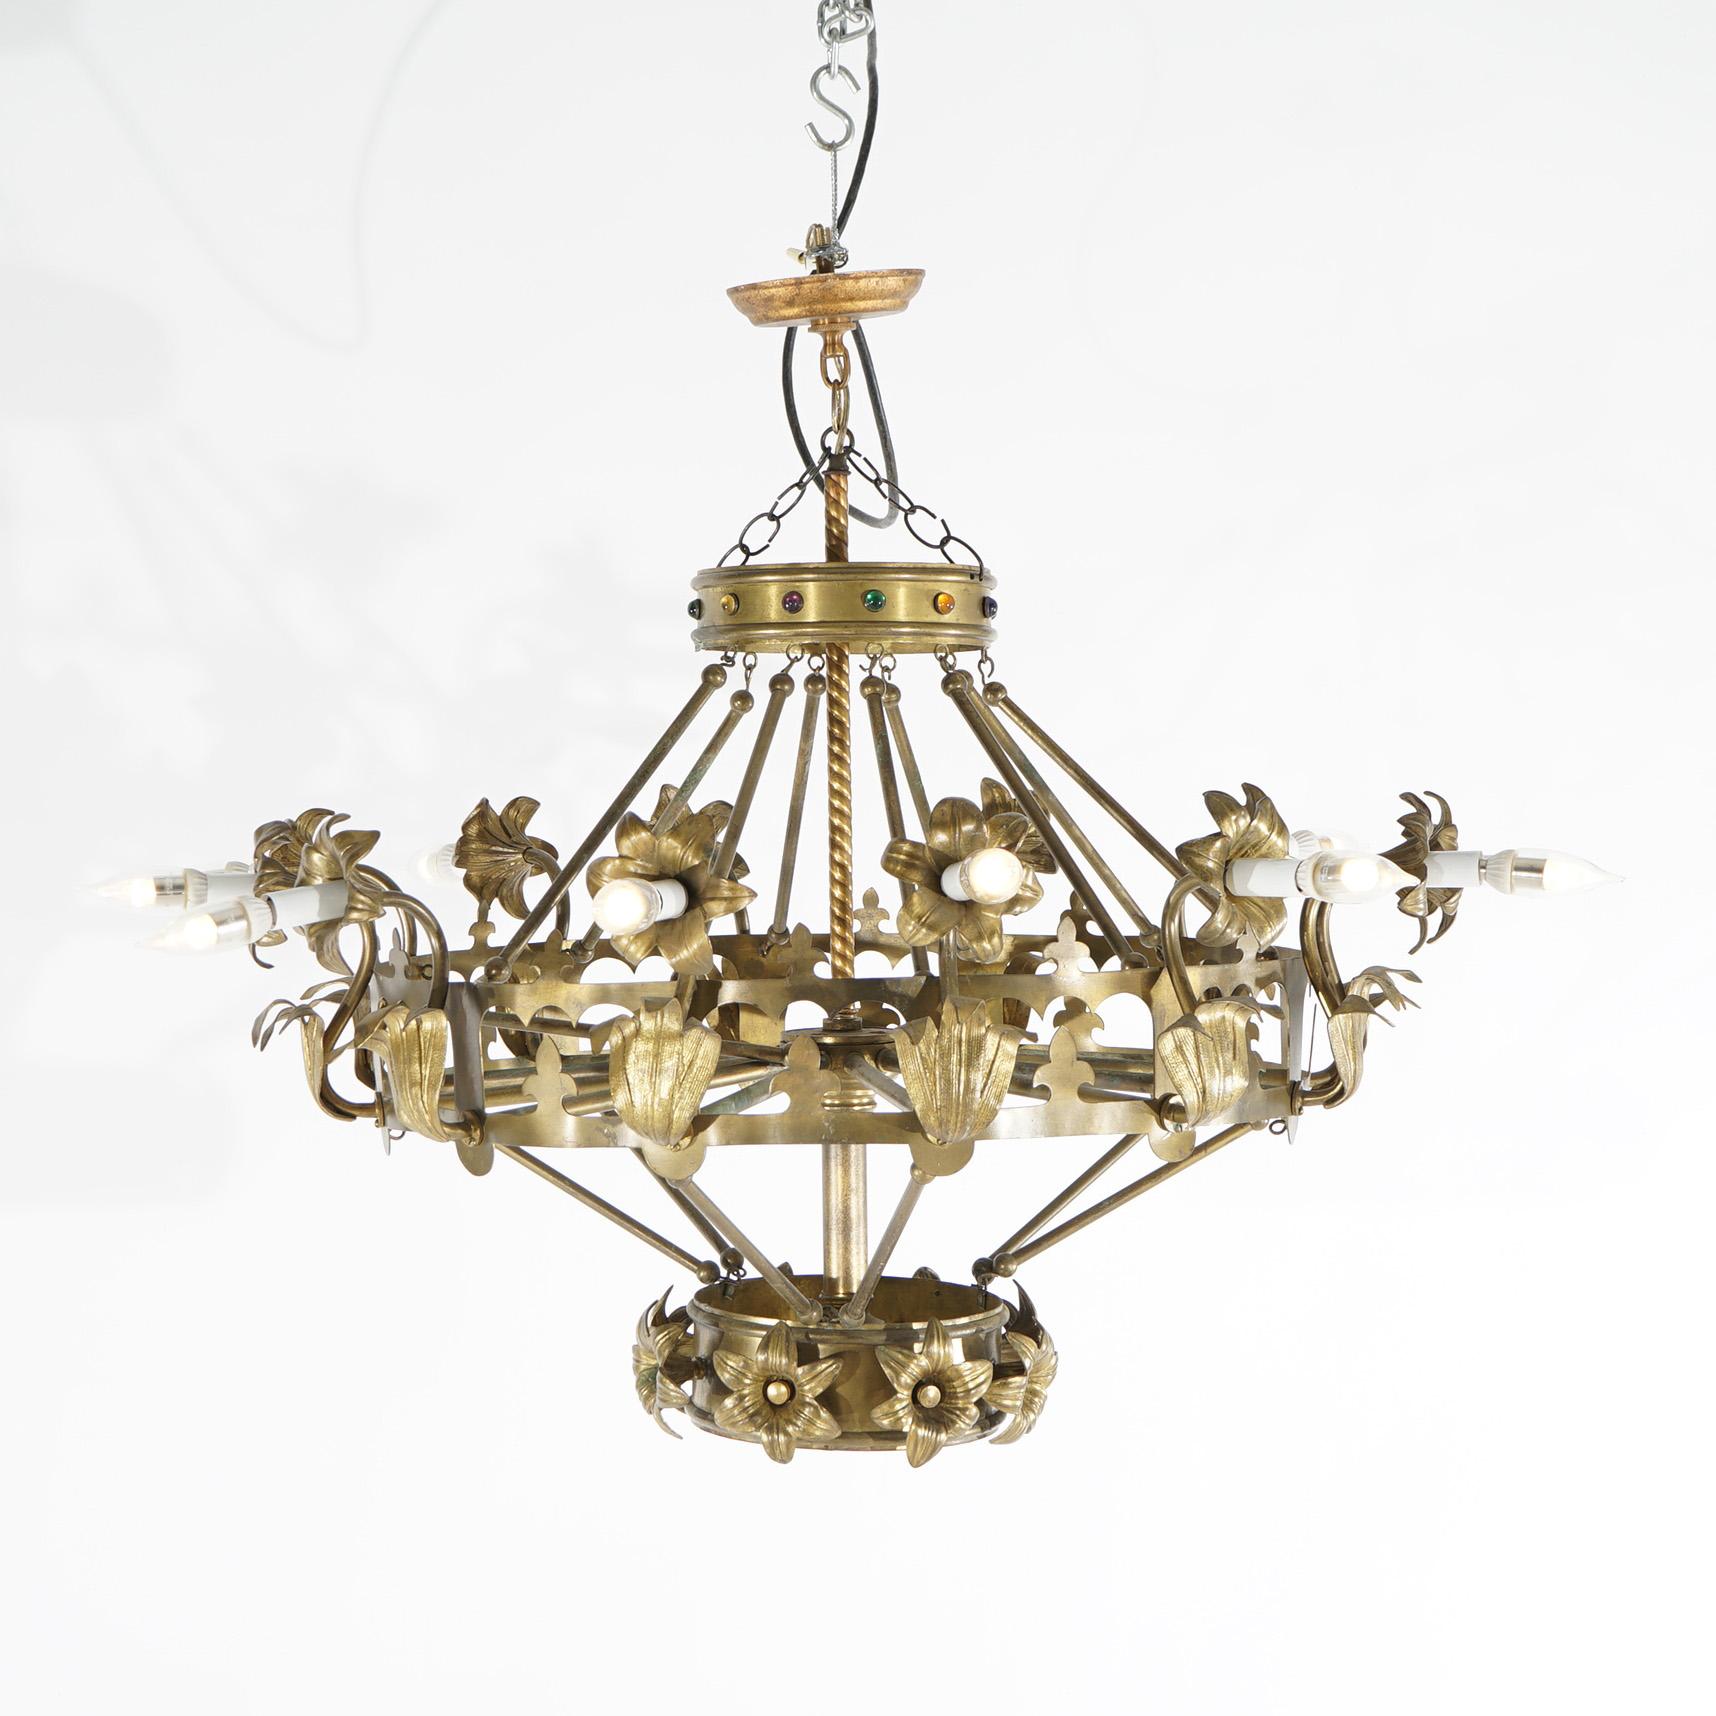 An antique French style chandelier offers brass frame in Fleur-de-Lis form having twelve floral form arms terminating in candle lights, jeweled accents, and rope twist drops, c1930

Measures- 32''H x 41''W x 41''D